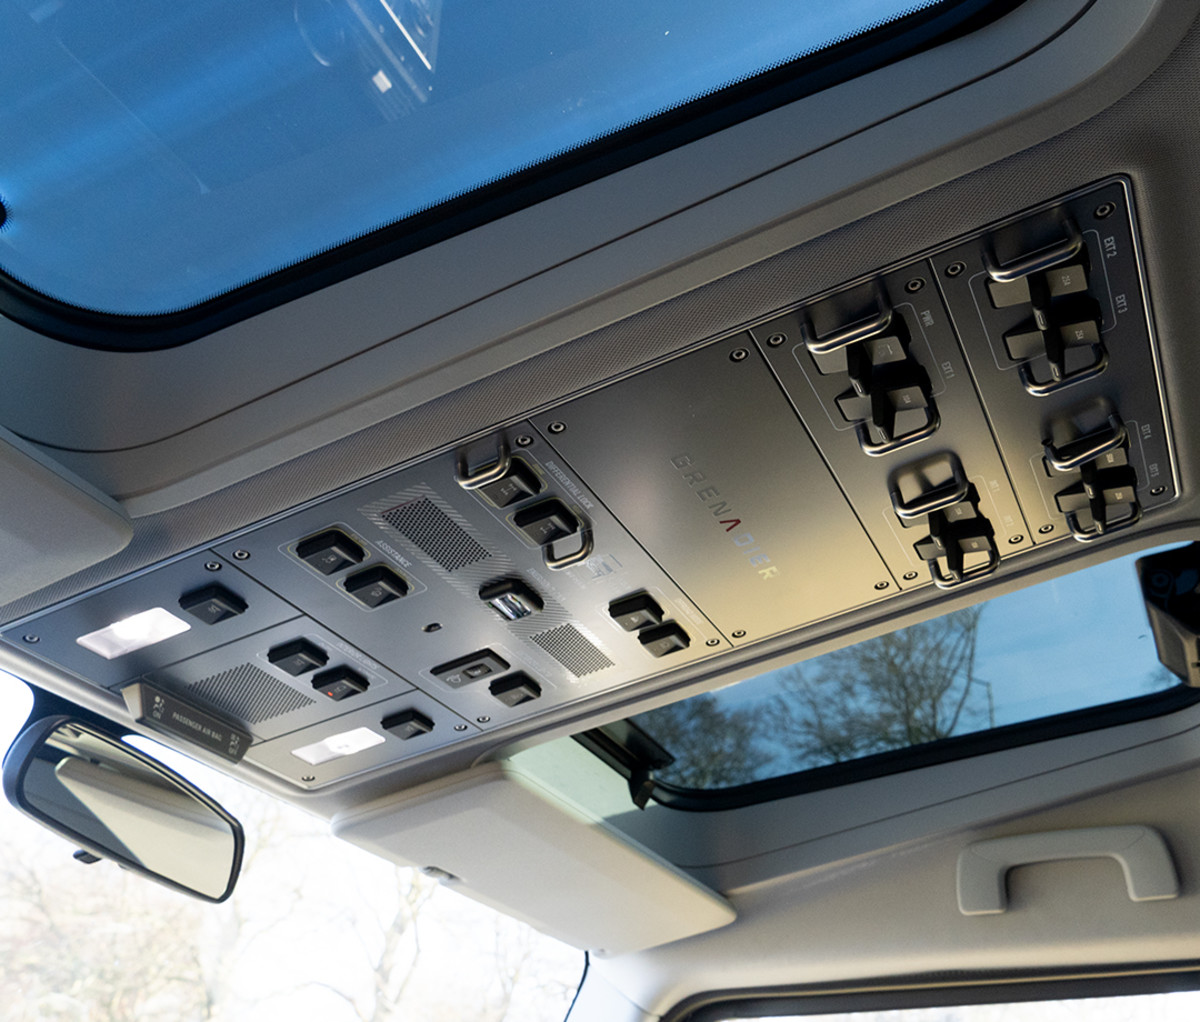 Ceiling mounted control panel for a 4x4 SUV.